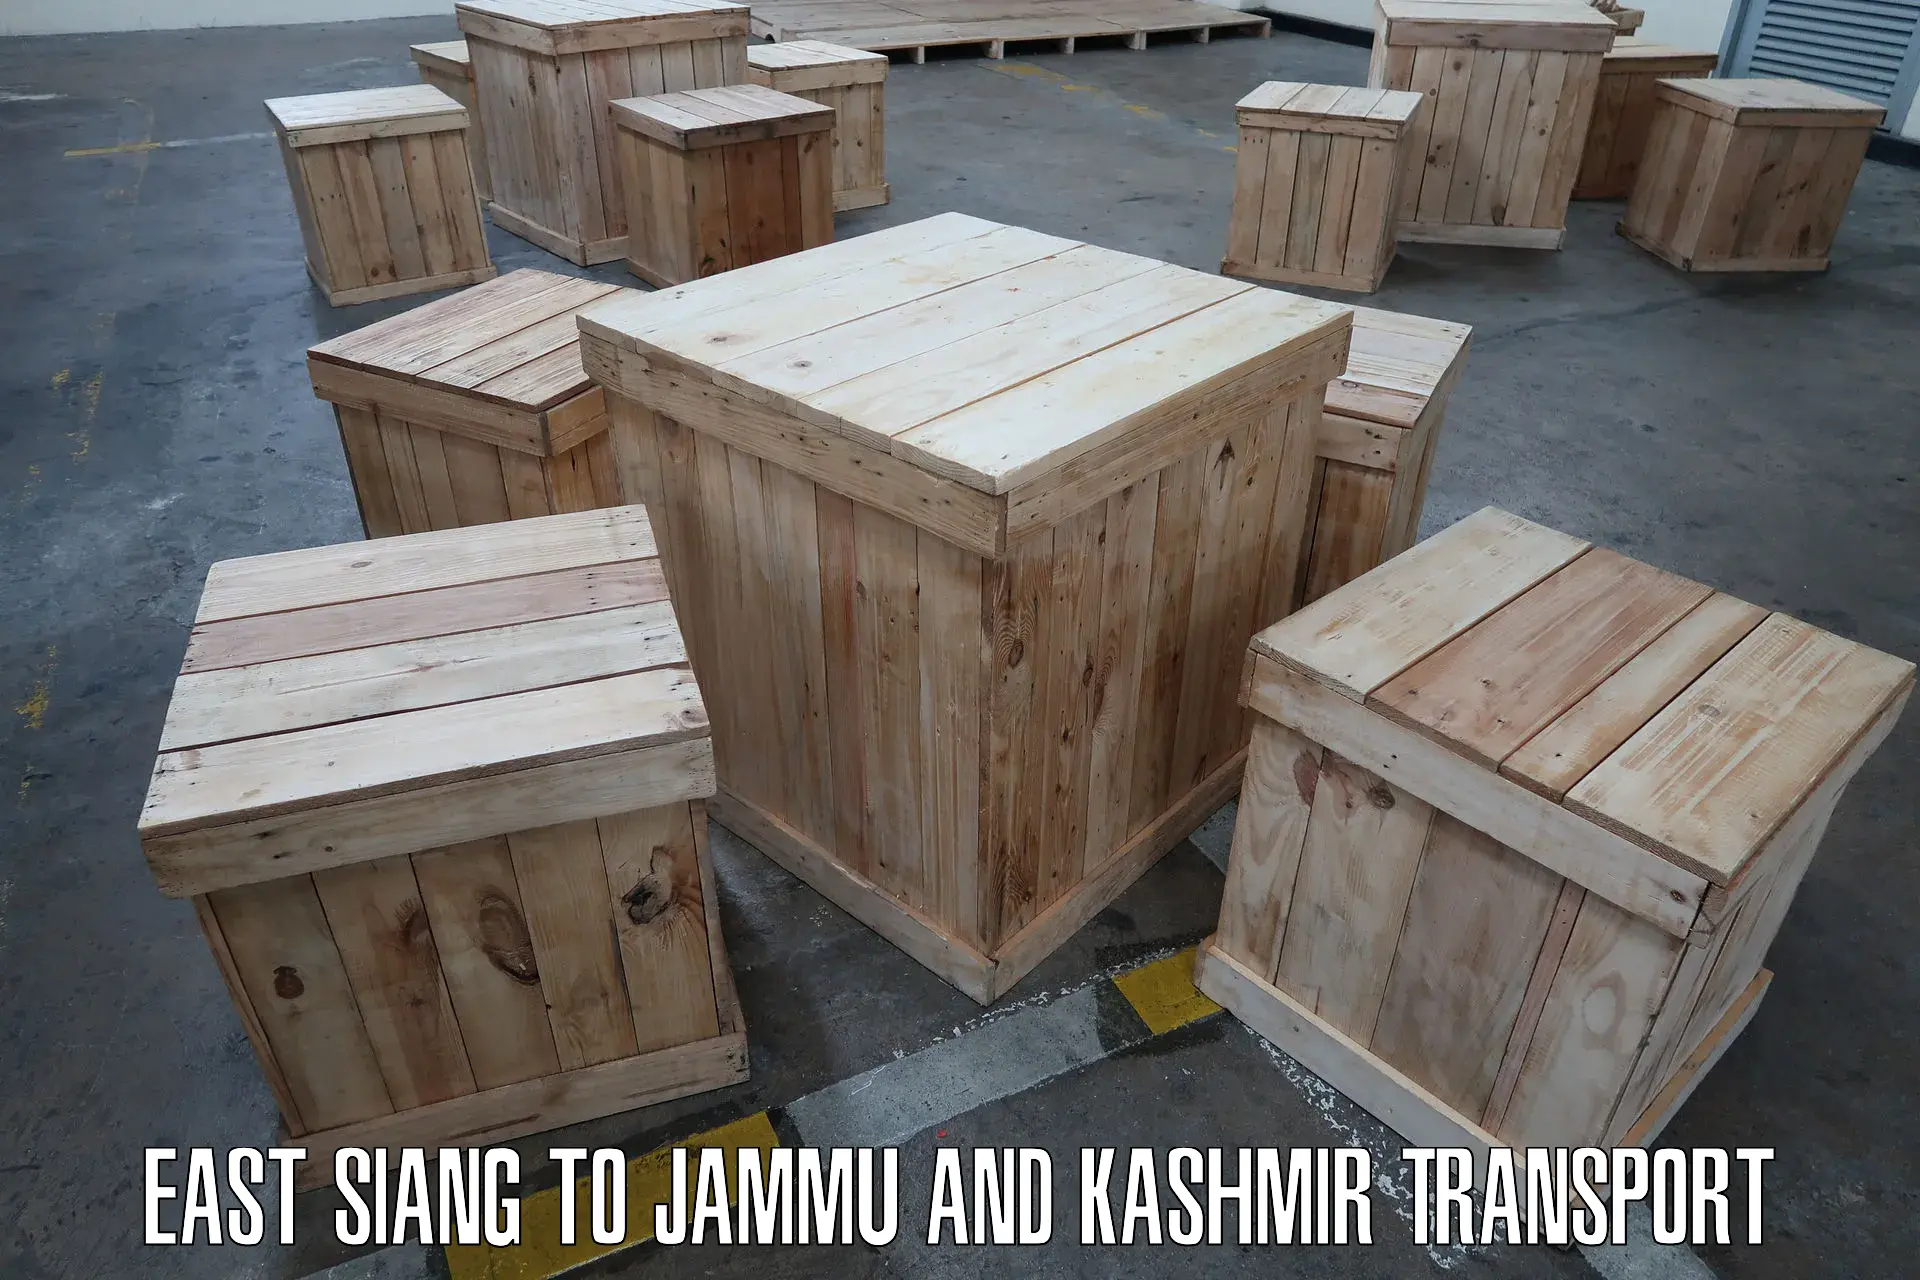 Nearby transport service East Siang to Jammu and Kashmir